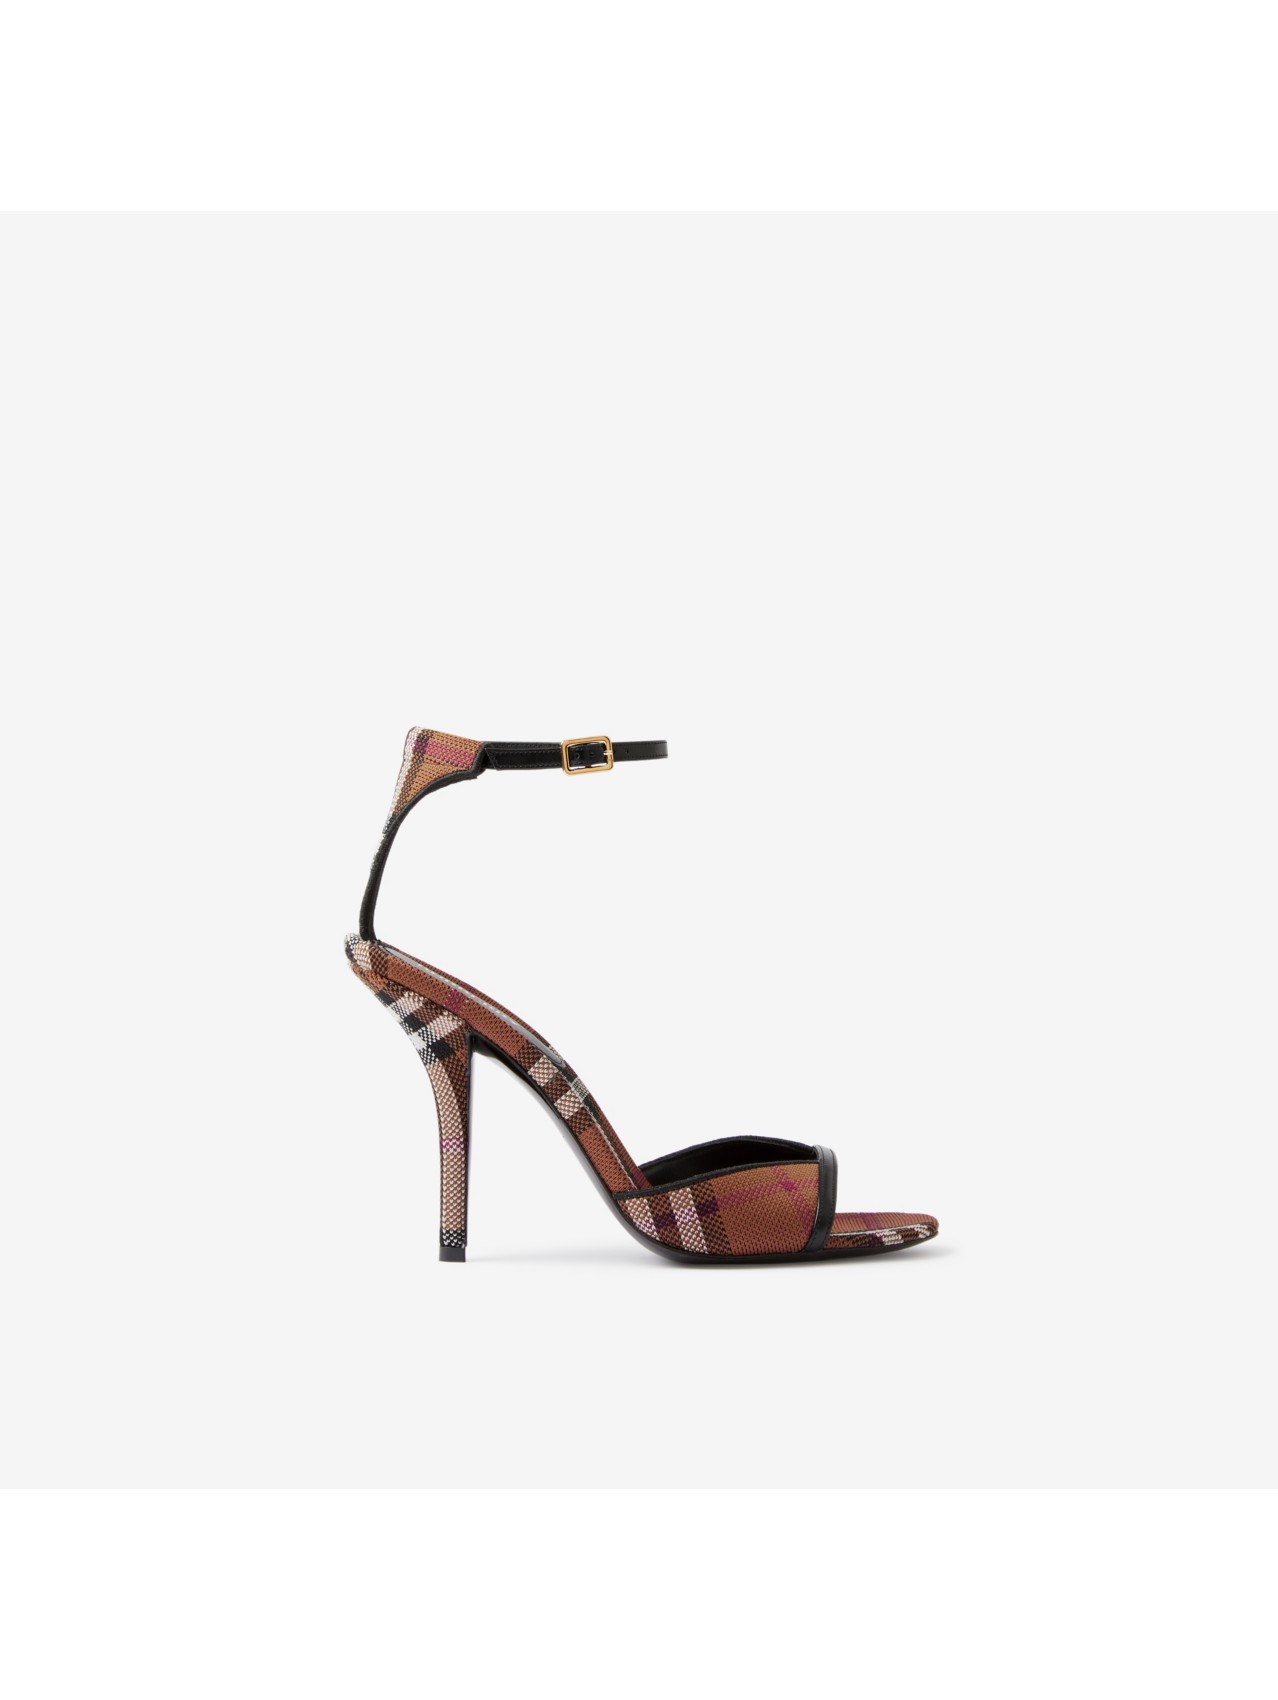 Sandals for Women | Burberry® Official